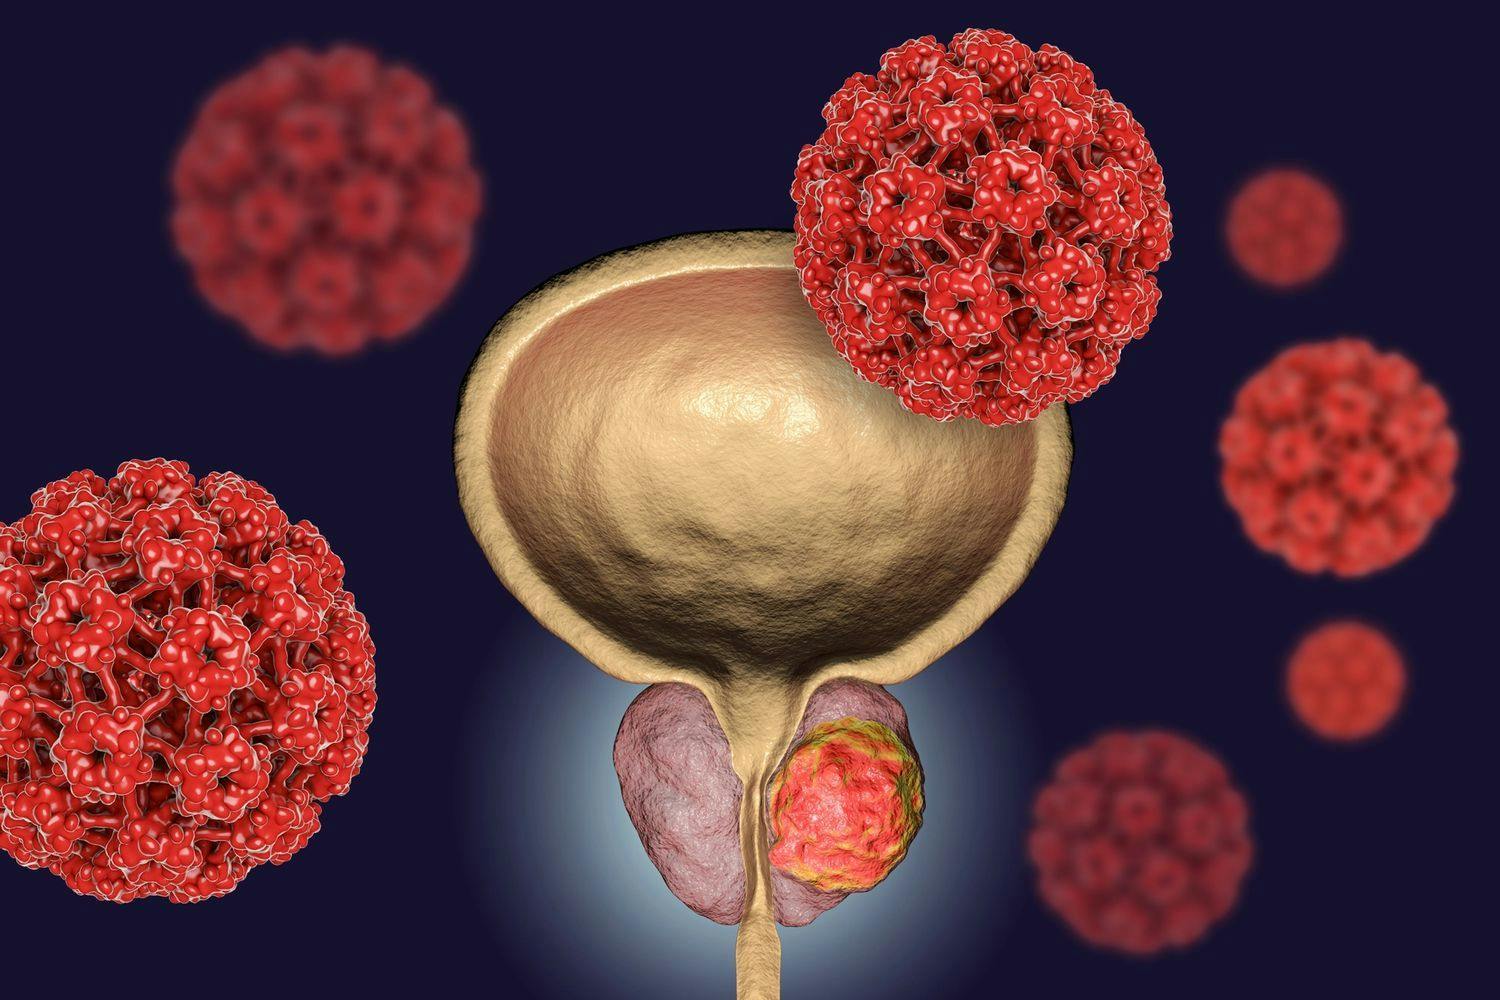 The phase 3 CAPTAIN trial was launched following the pivotal TACT trial, which showed that TULSA provided durable disease control with low toxicity at 3 years’ follow-up in men with localized prostate cancer.